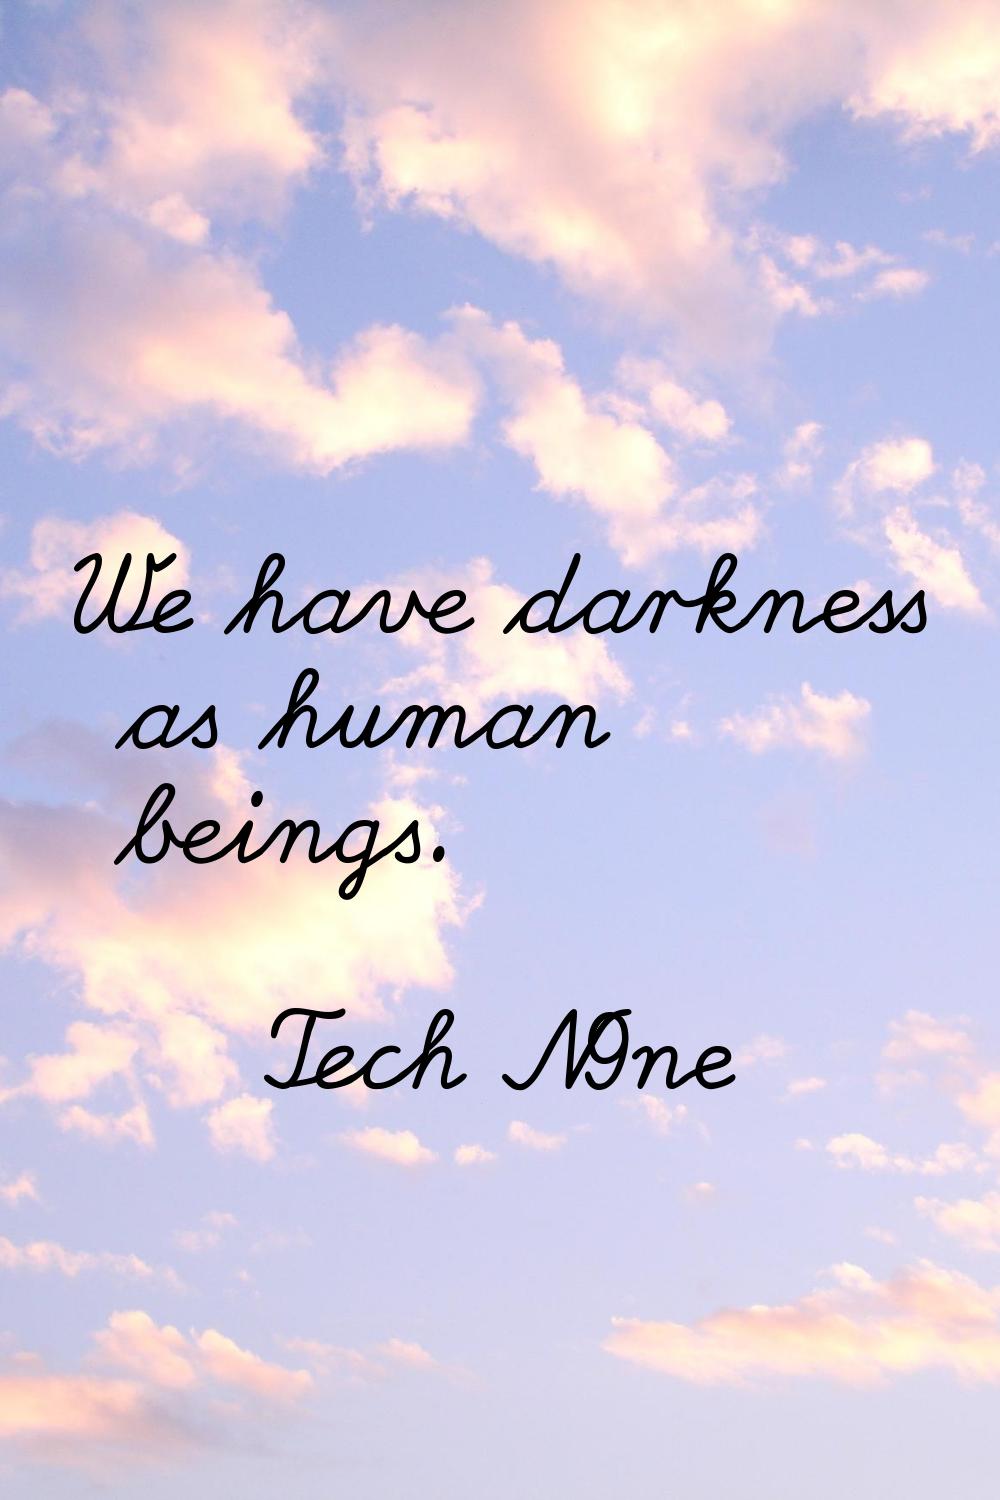 We have darkness as human beings.